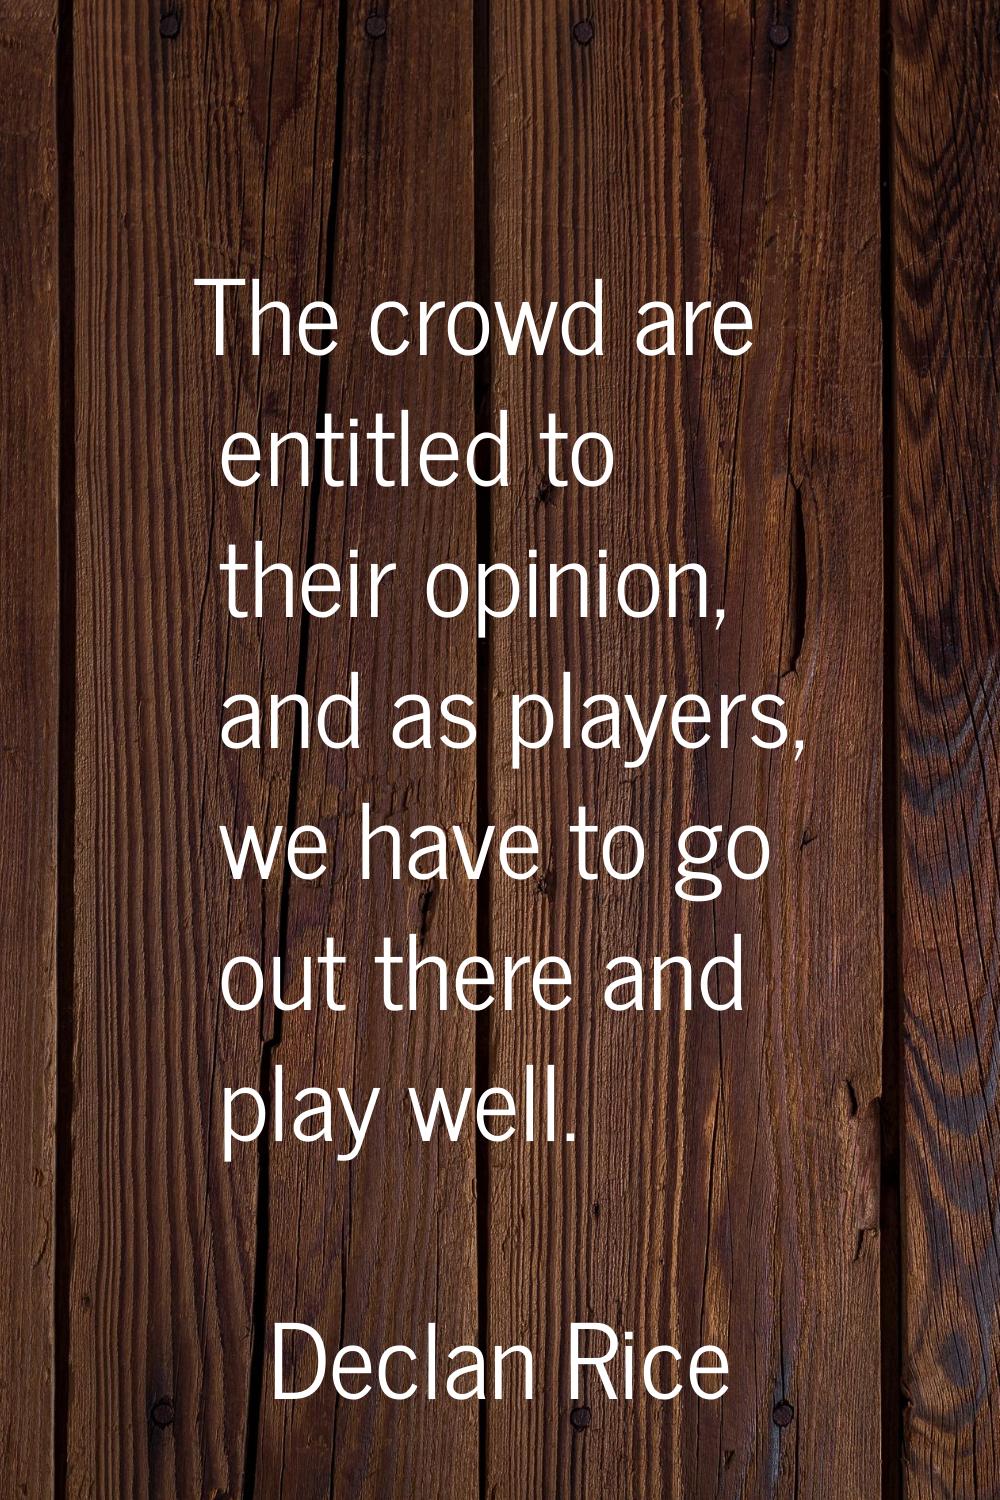 The crowd are entitled to their opinion, and as players, we have to go out there and play well.